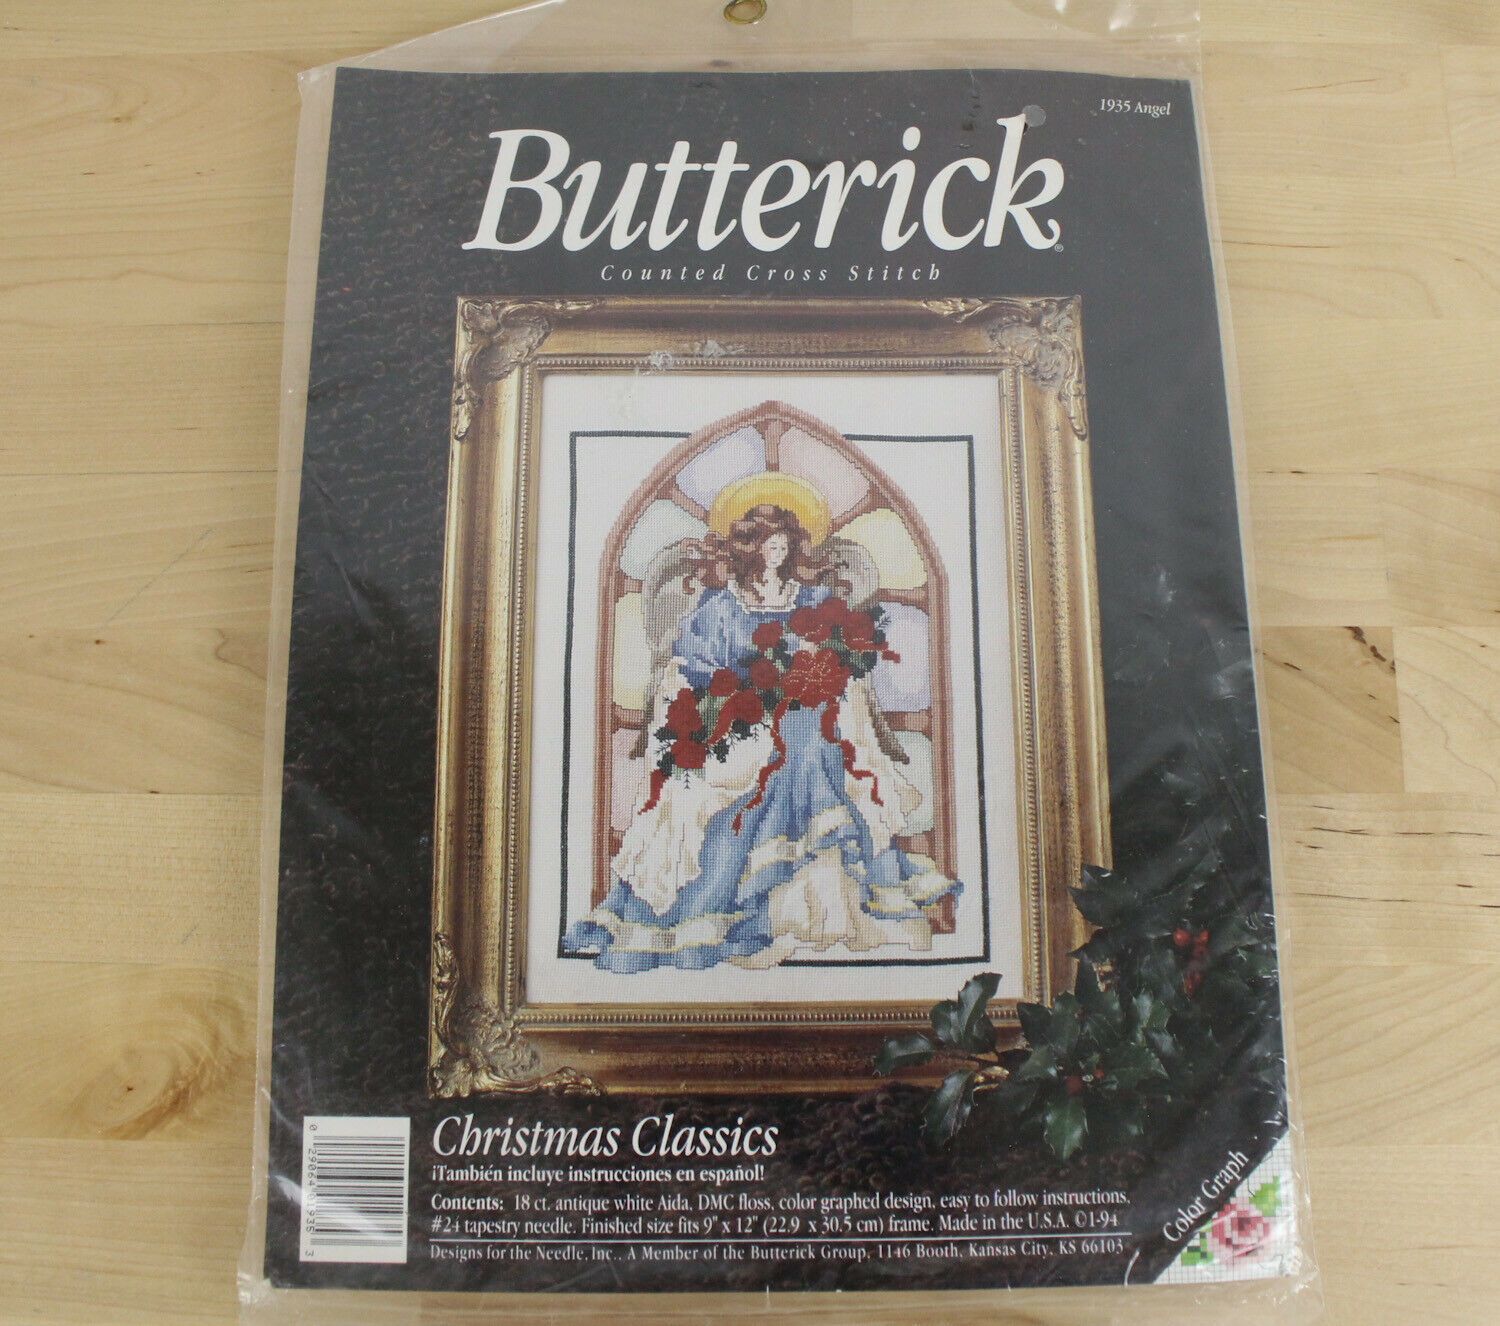 Butterick 1935 Angel Counted Cross Stitch Kit Christmas Classics 9"x12" Roses - $19.79